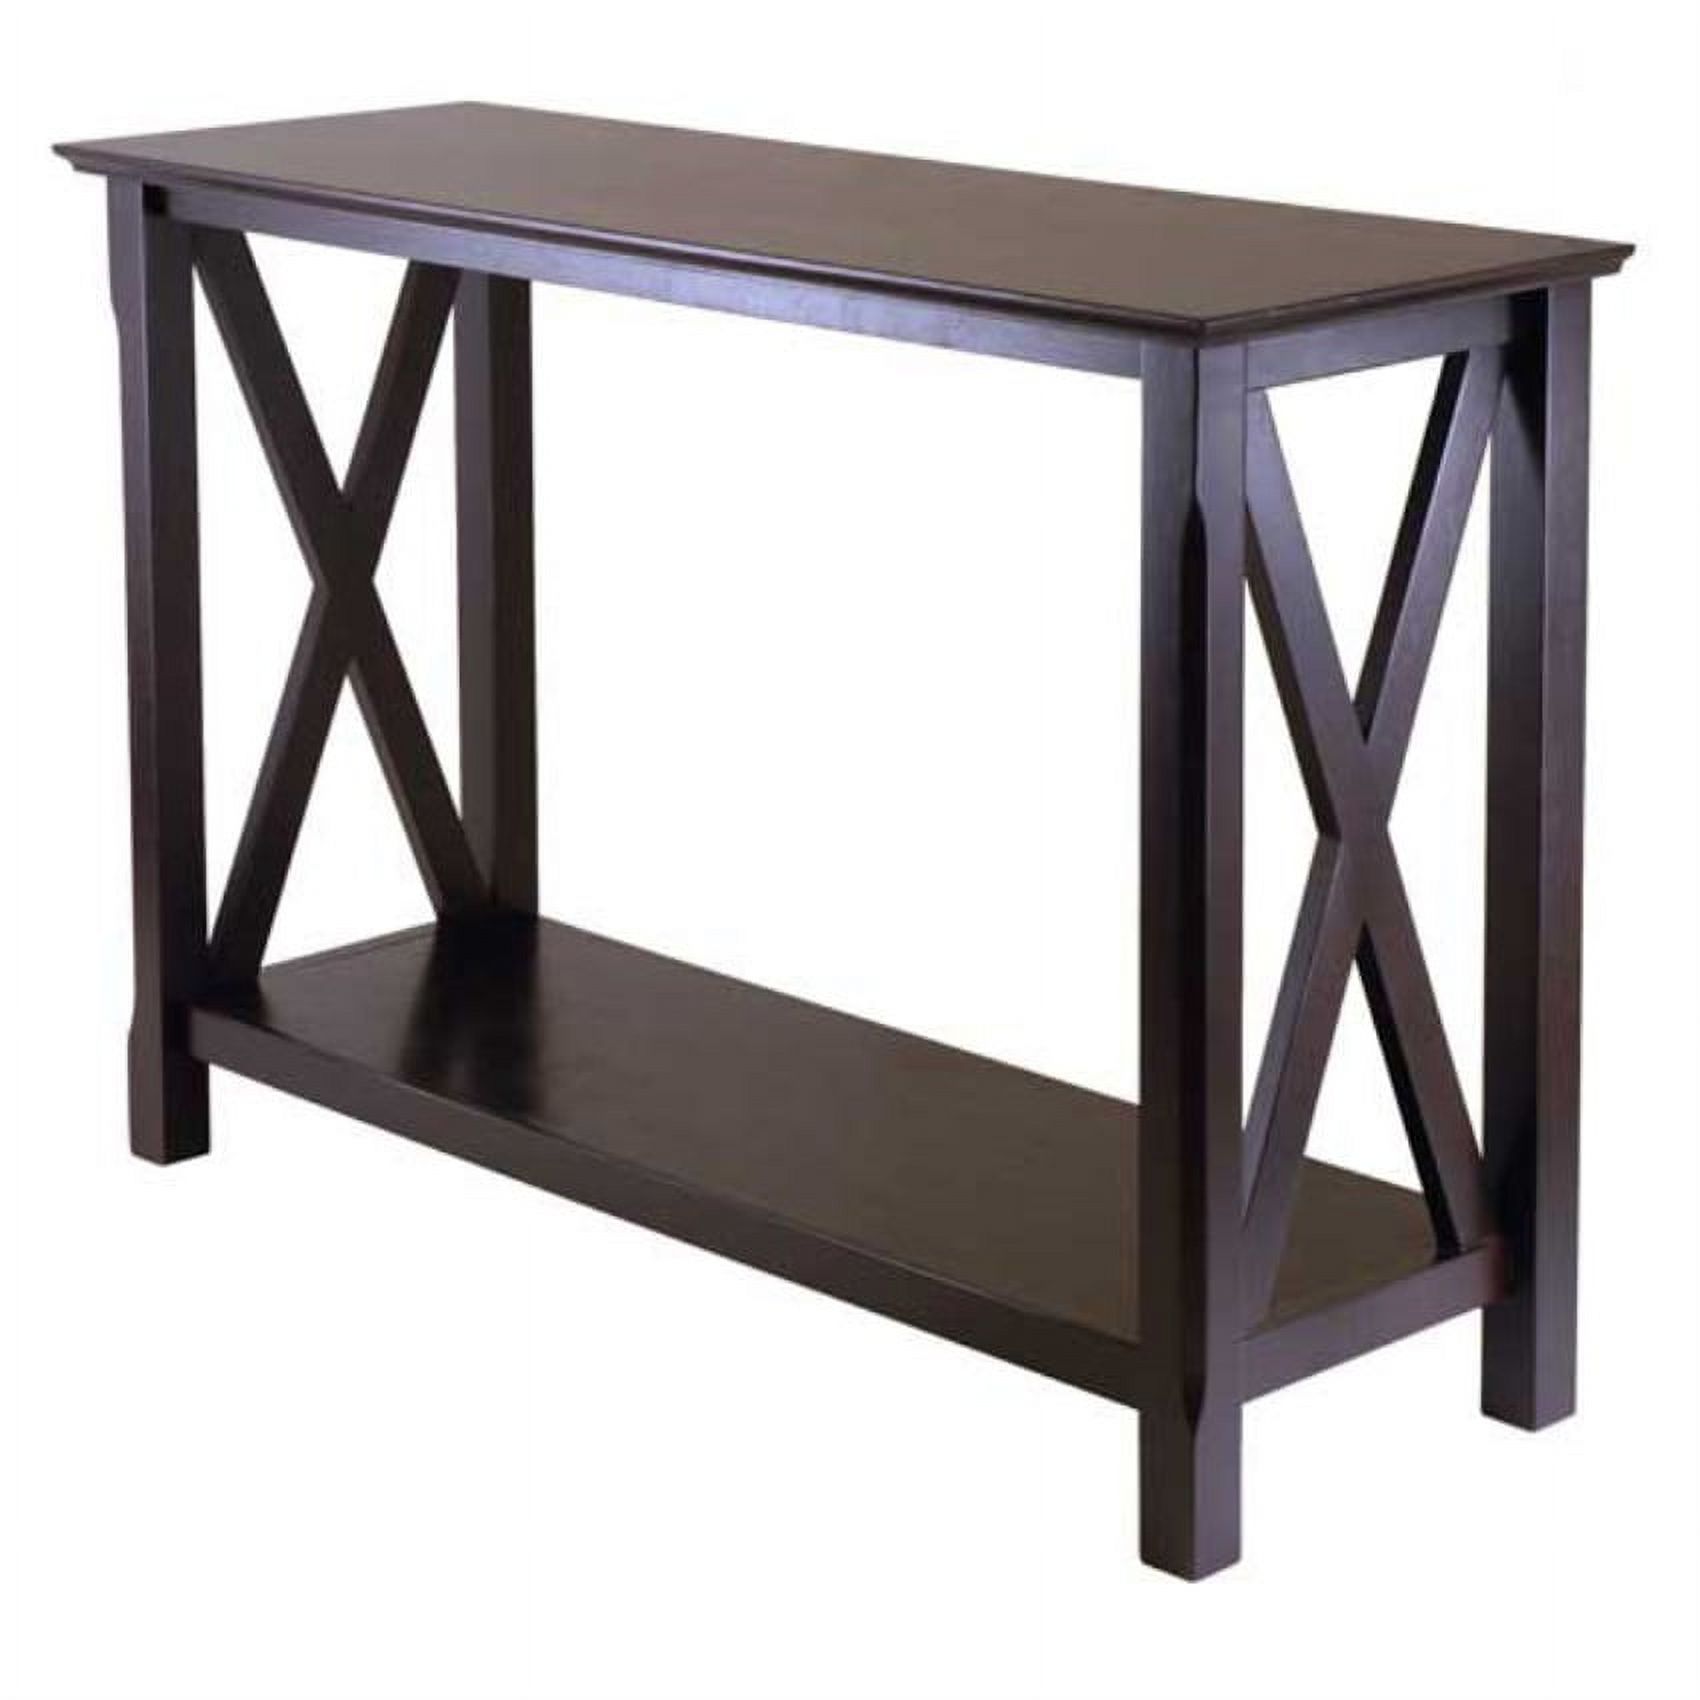 Winsome Wood Xola X-Panel Console Table, Cappuccino Finish - image 2 of 5